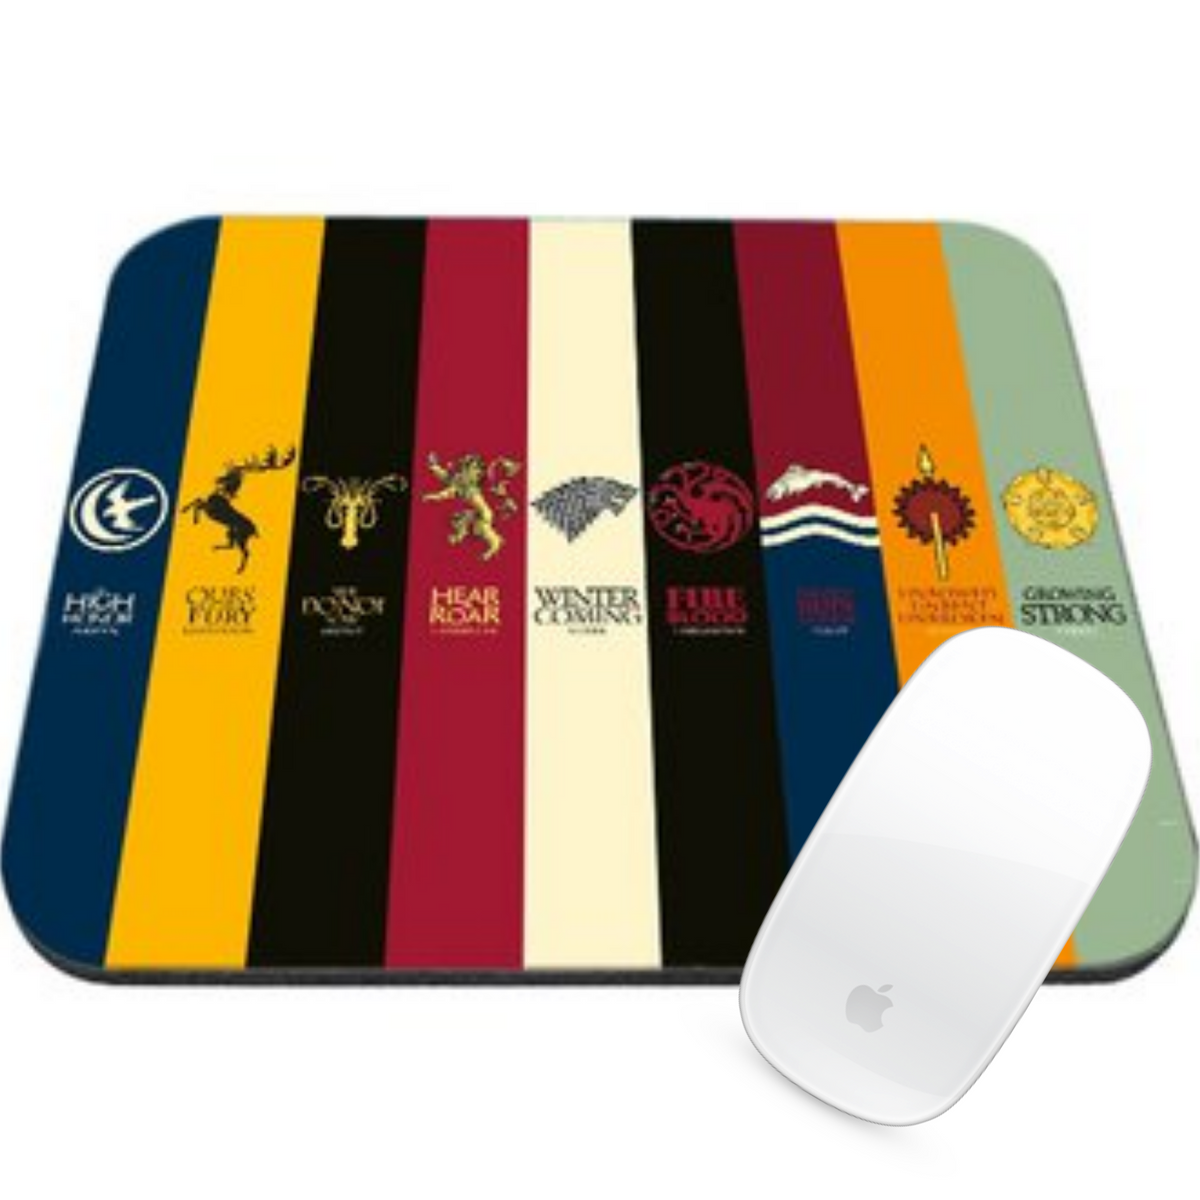 MOUSE PAD-GAME OF THRONES